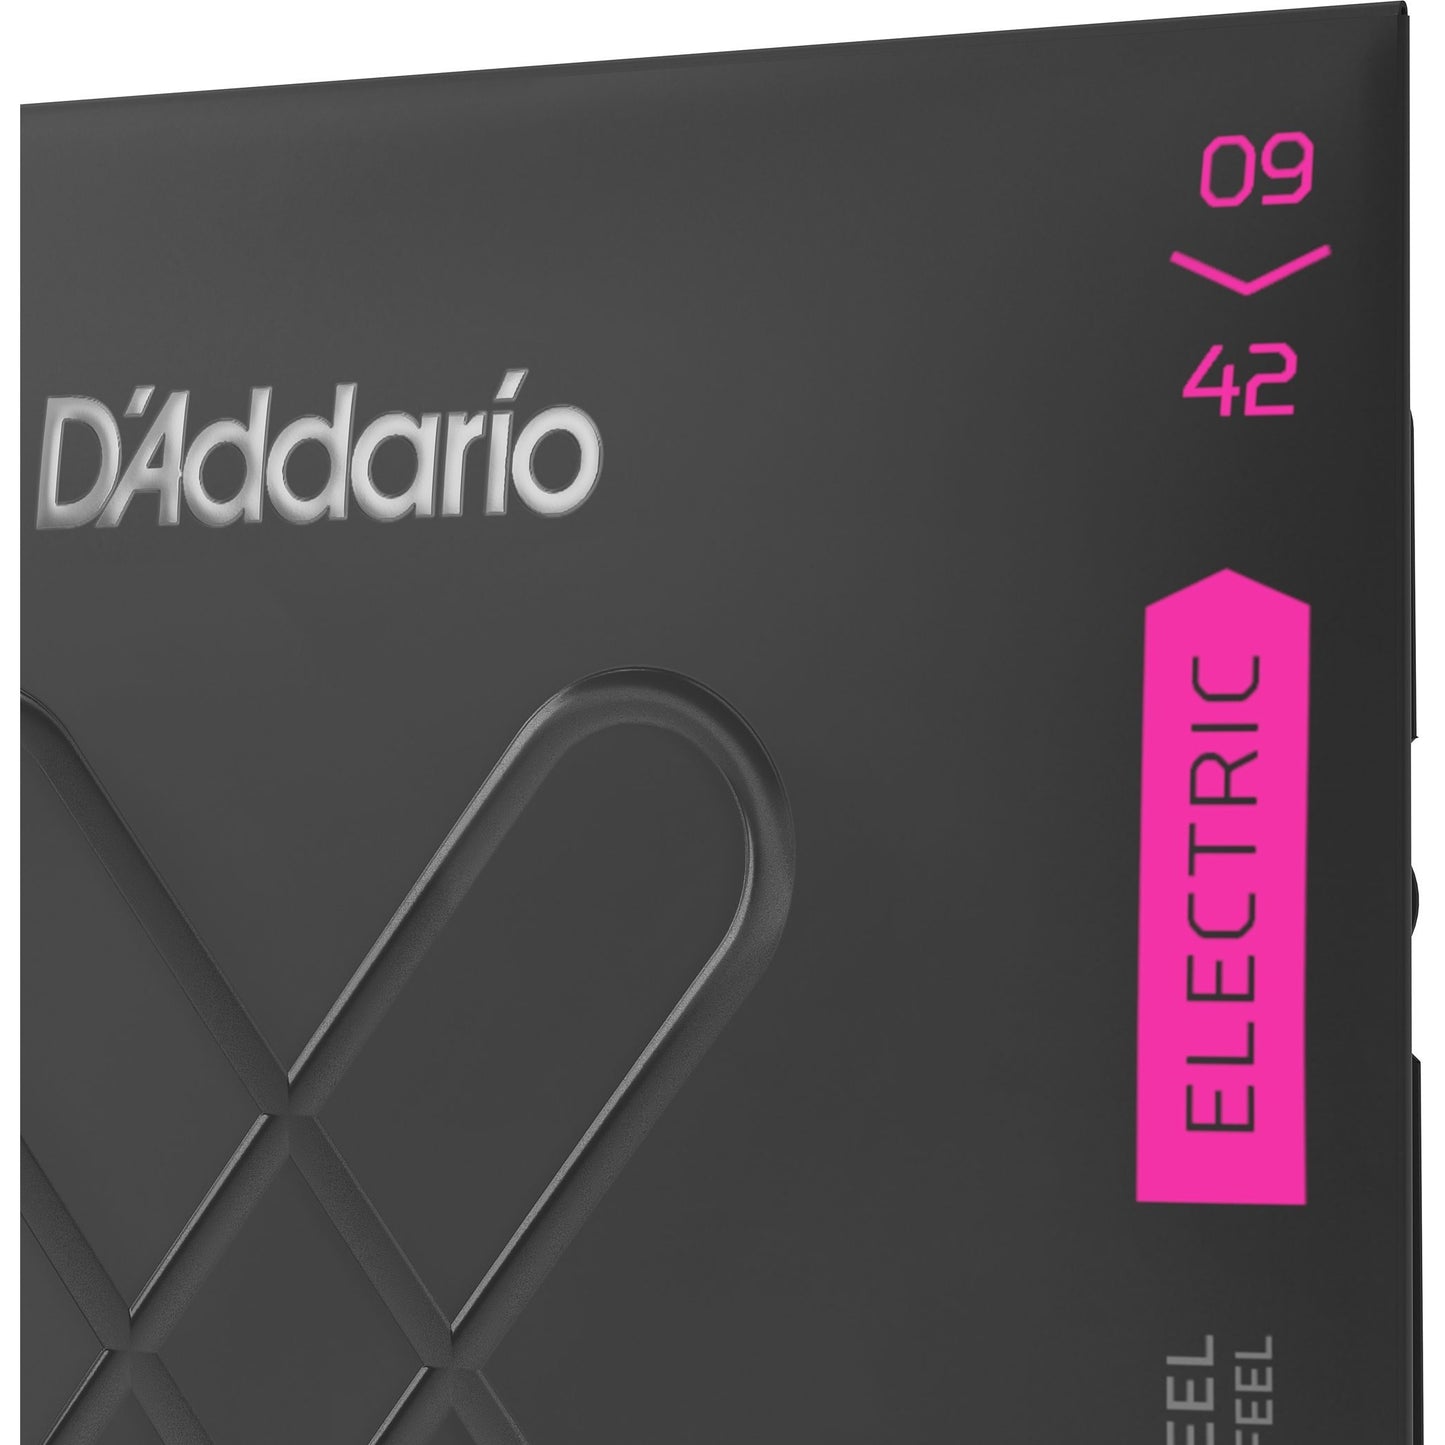 D'Addario XTE0942 Super Light Electric Nickel Plated Steel Electric Guitar Strings